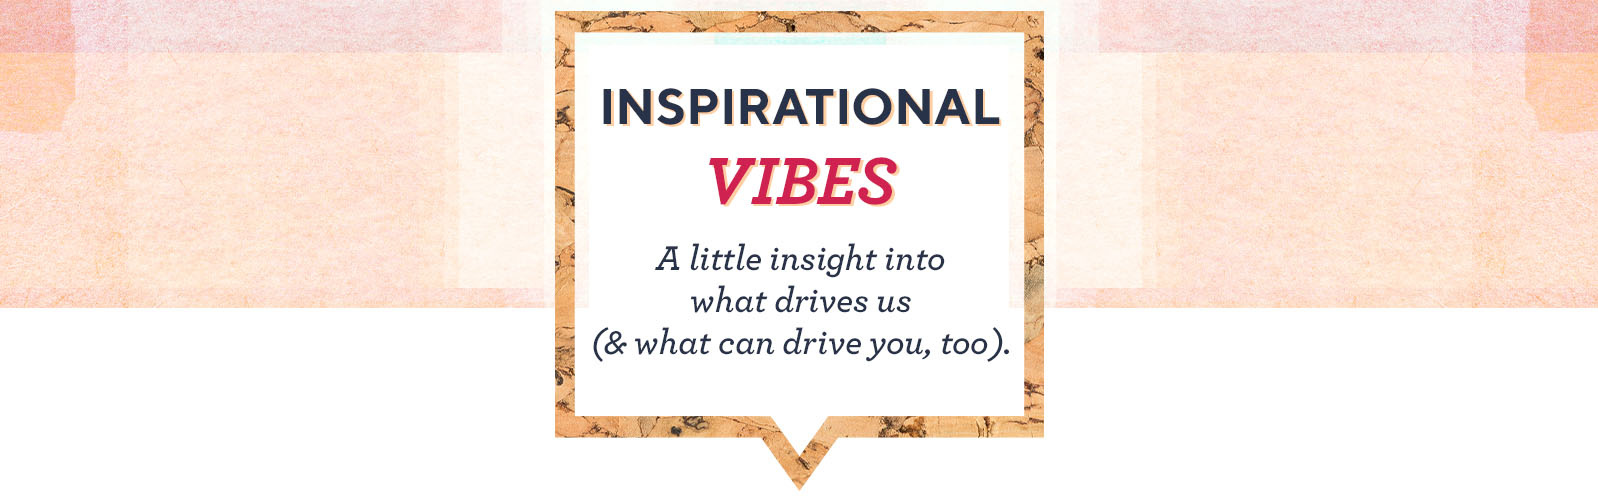 Inspirational Vibes - A little insight into what drives us (& what can drive you, too).